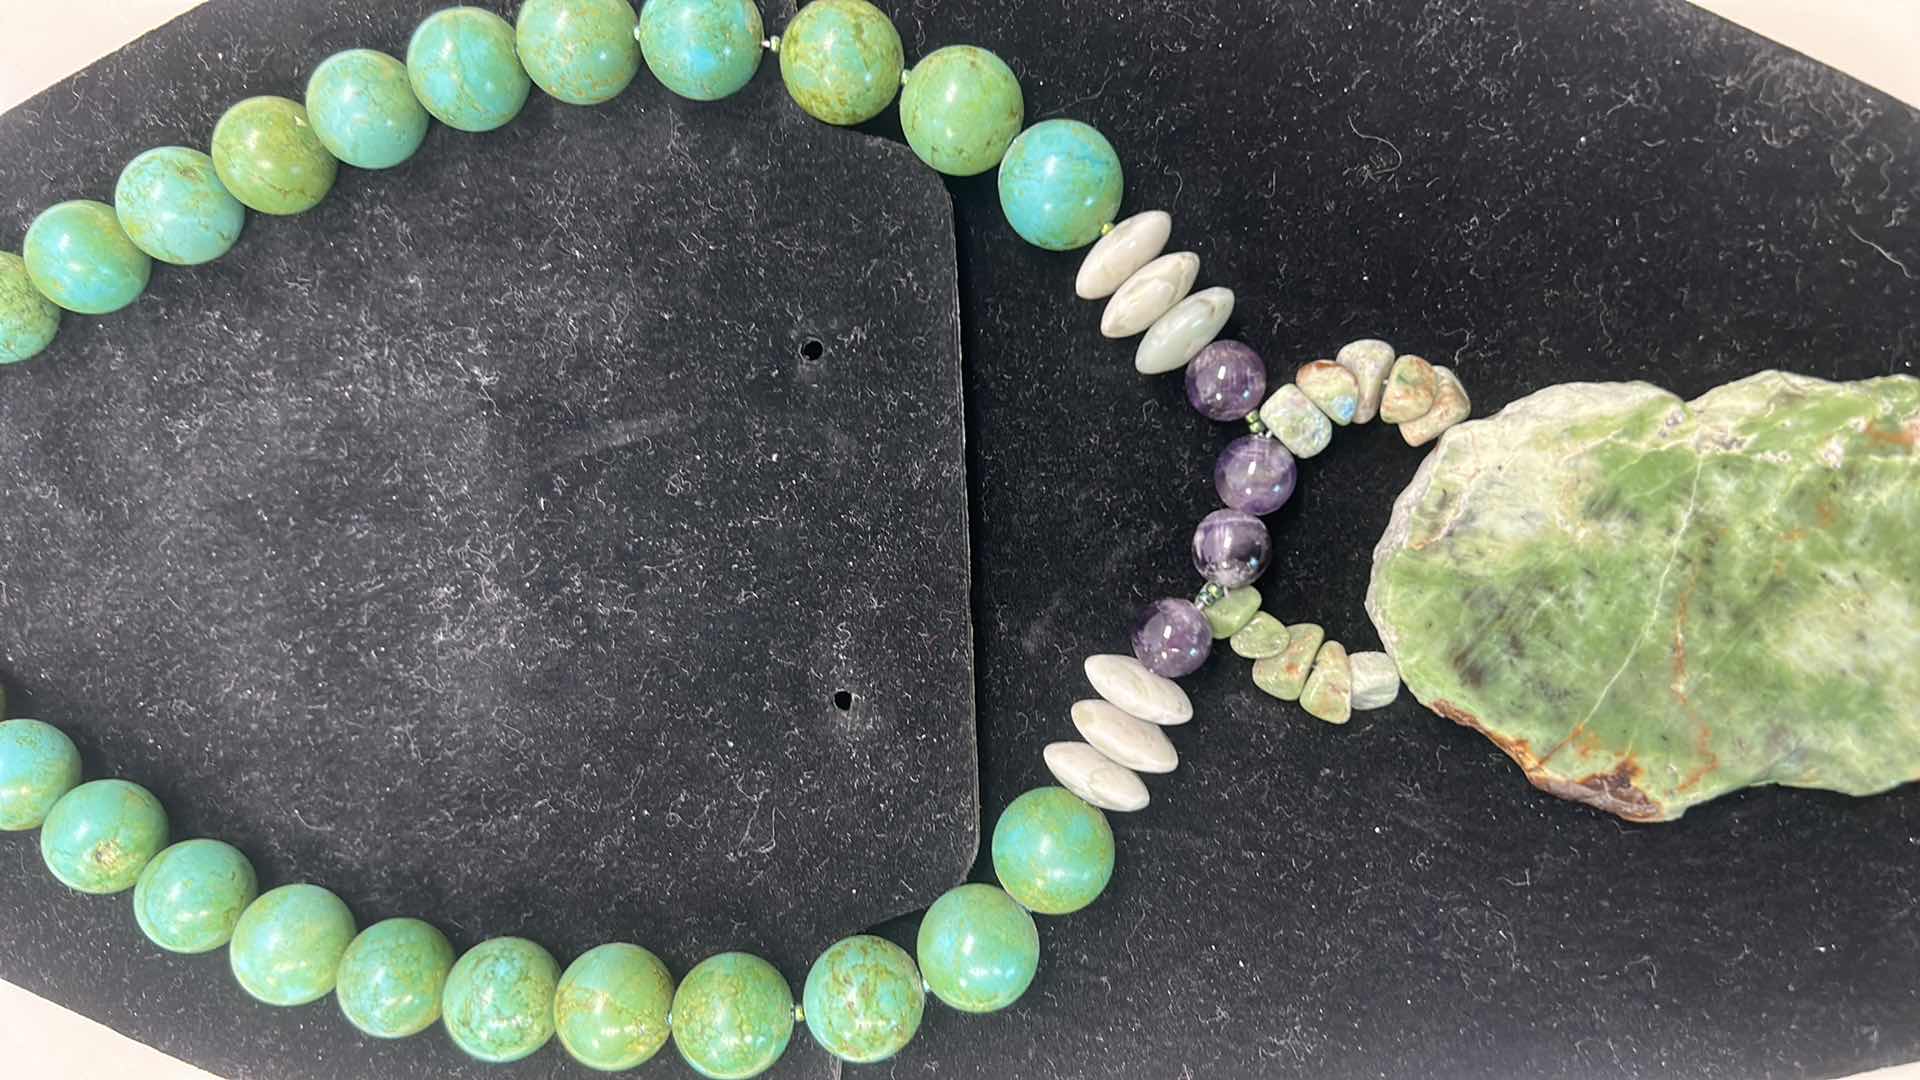 Photo 4 of STUNNING STONE NECKLACE, JADE MEASURES 2 1/4” x 3 1/4” ROUND 1/2” CHRYSOPRASE BEADS